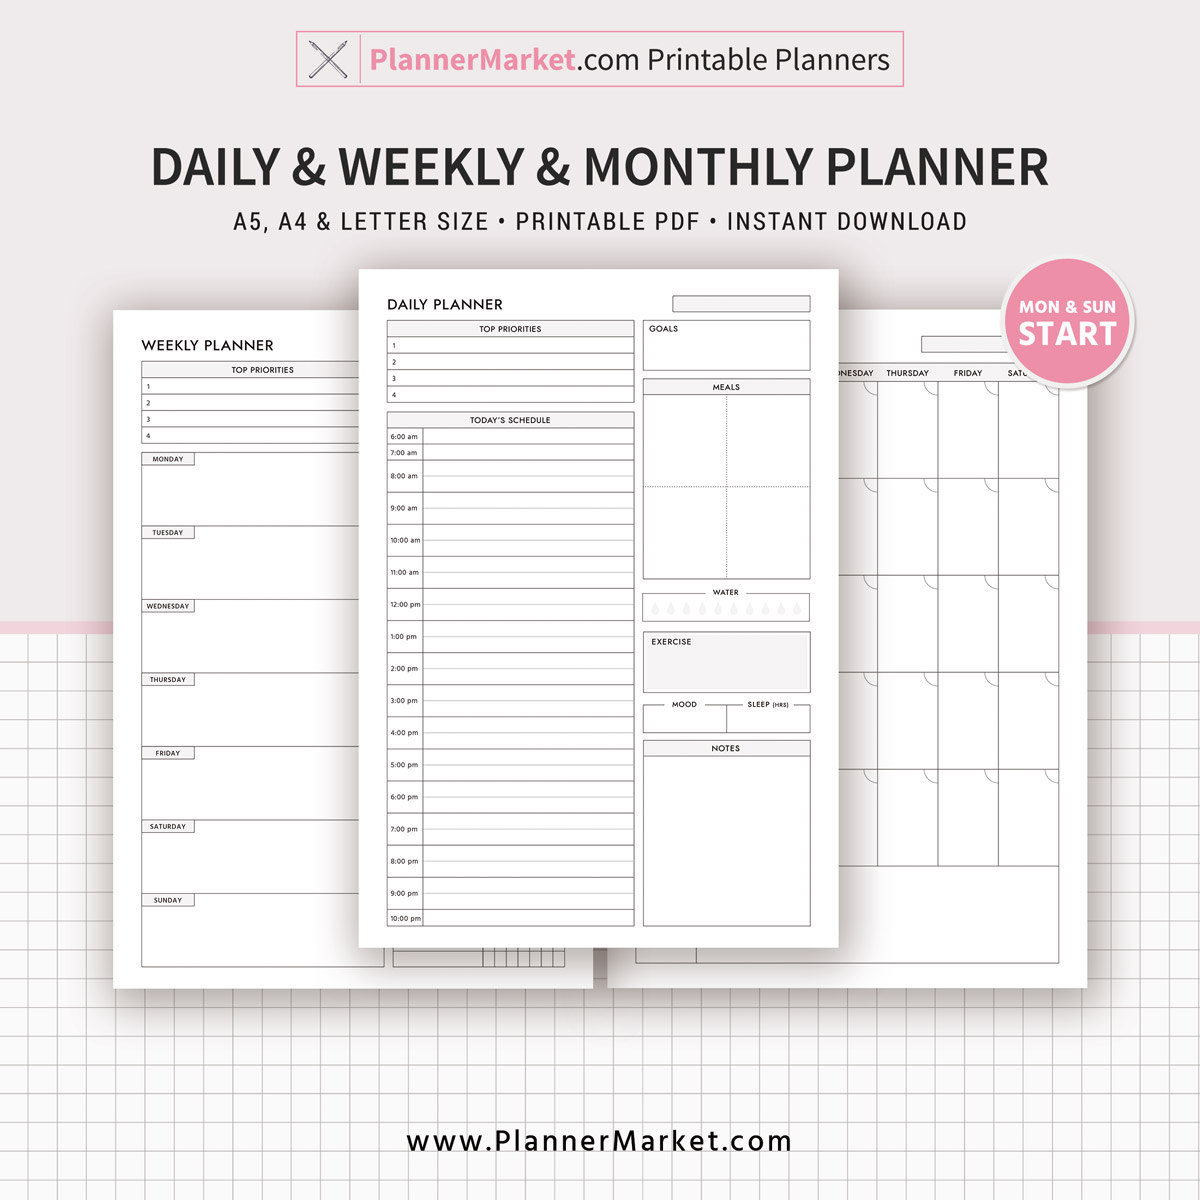 Printable and Digital Planner A4 Weekly and Monthly Planner Bundle US Daily A5 Printable Planner Inserts: 38 Minimal Planner Pages